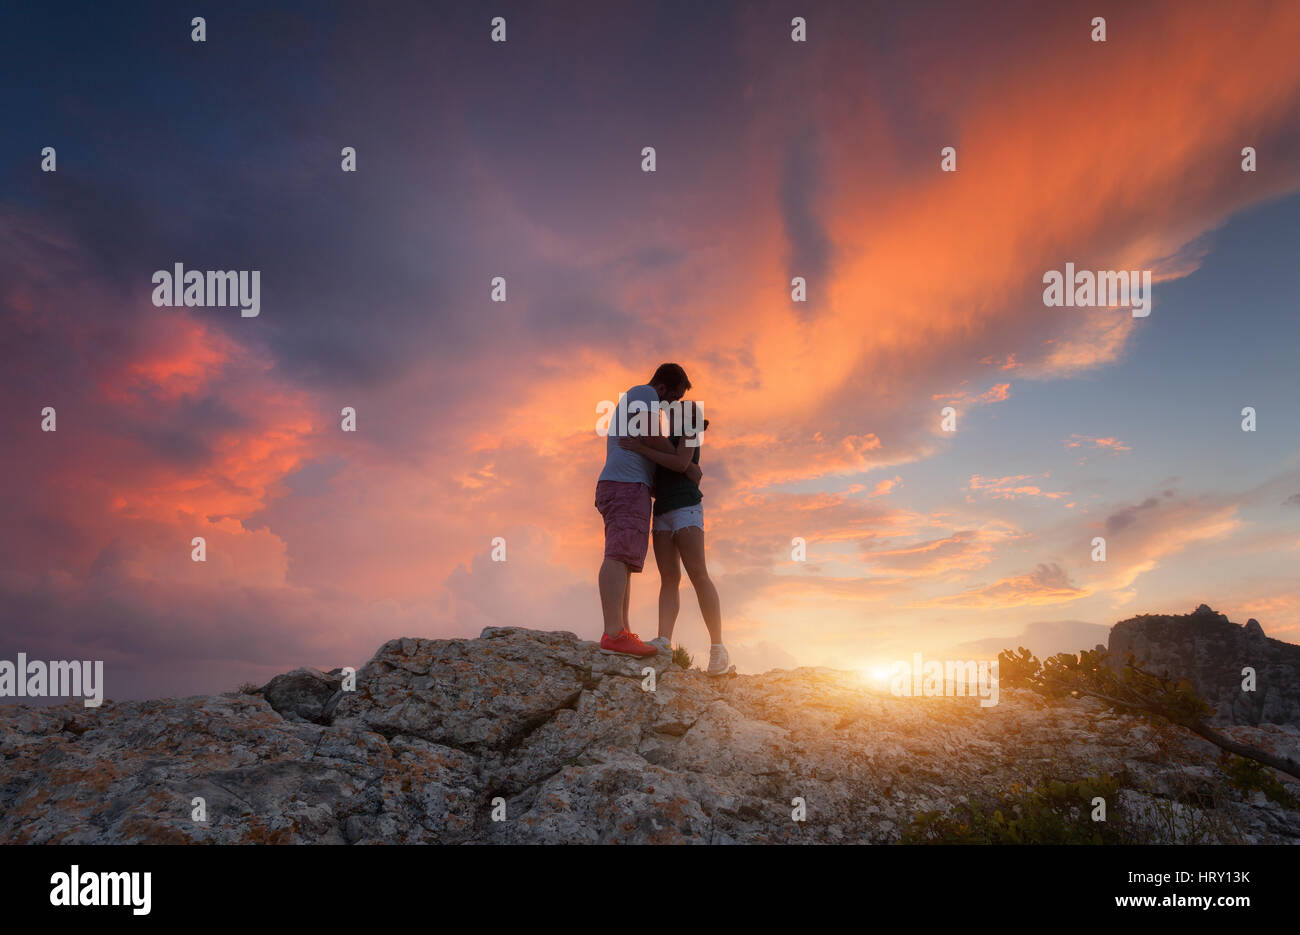 Silhouettes of a hugging and kissing man and woman on the mountain peak at sunset. Landscape with silhouette of young people against colorful sky Stock Photo